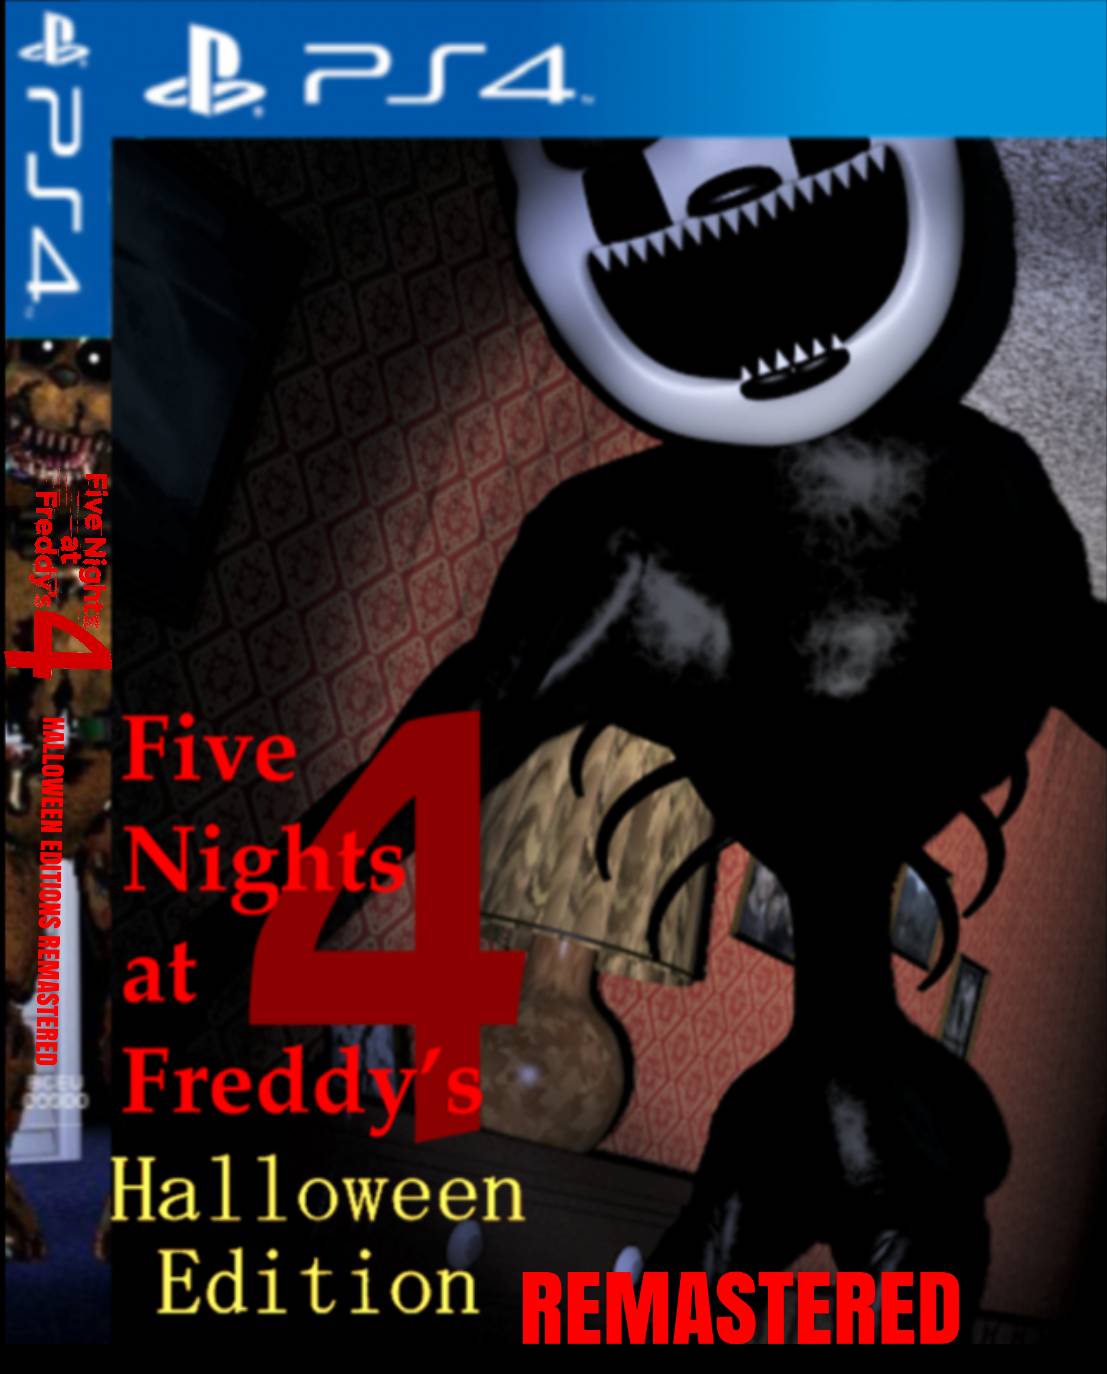 Five Nights at Freddy's 4 Halloween Edition Live Stream 